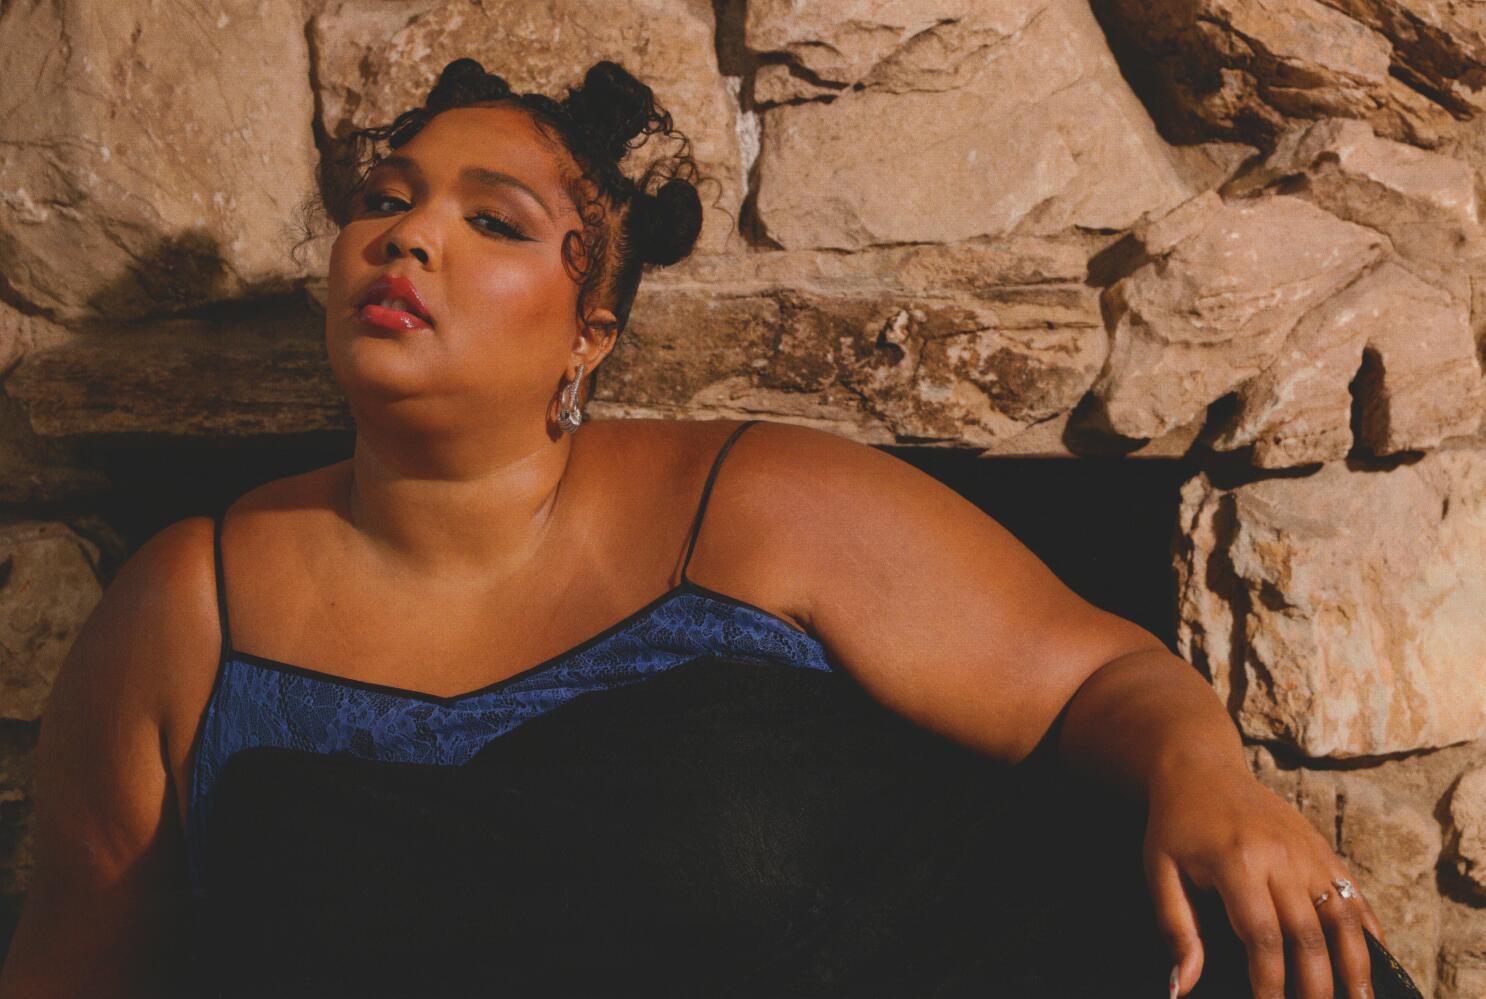 Lizzo wants to be a 'world changer' with her new shapewear line